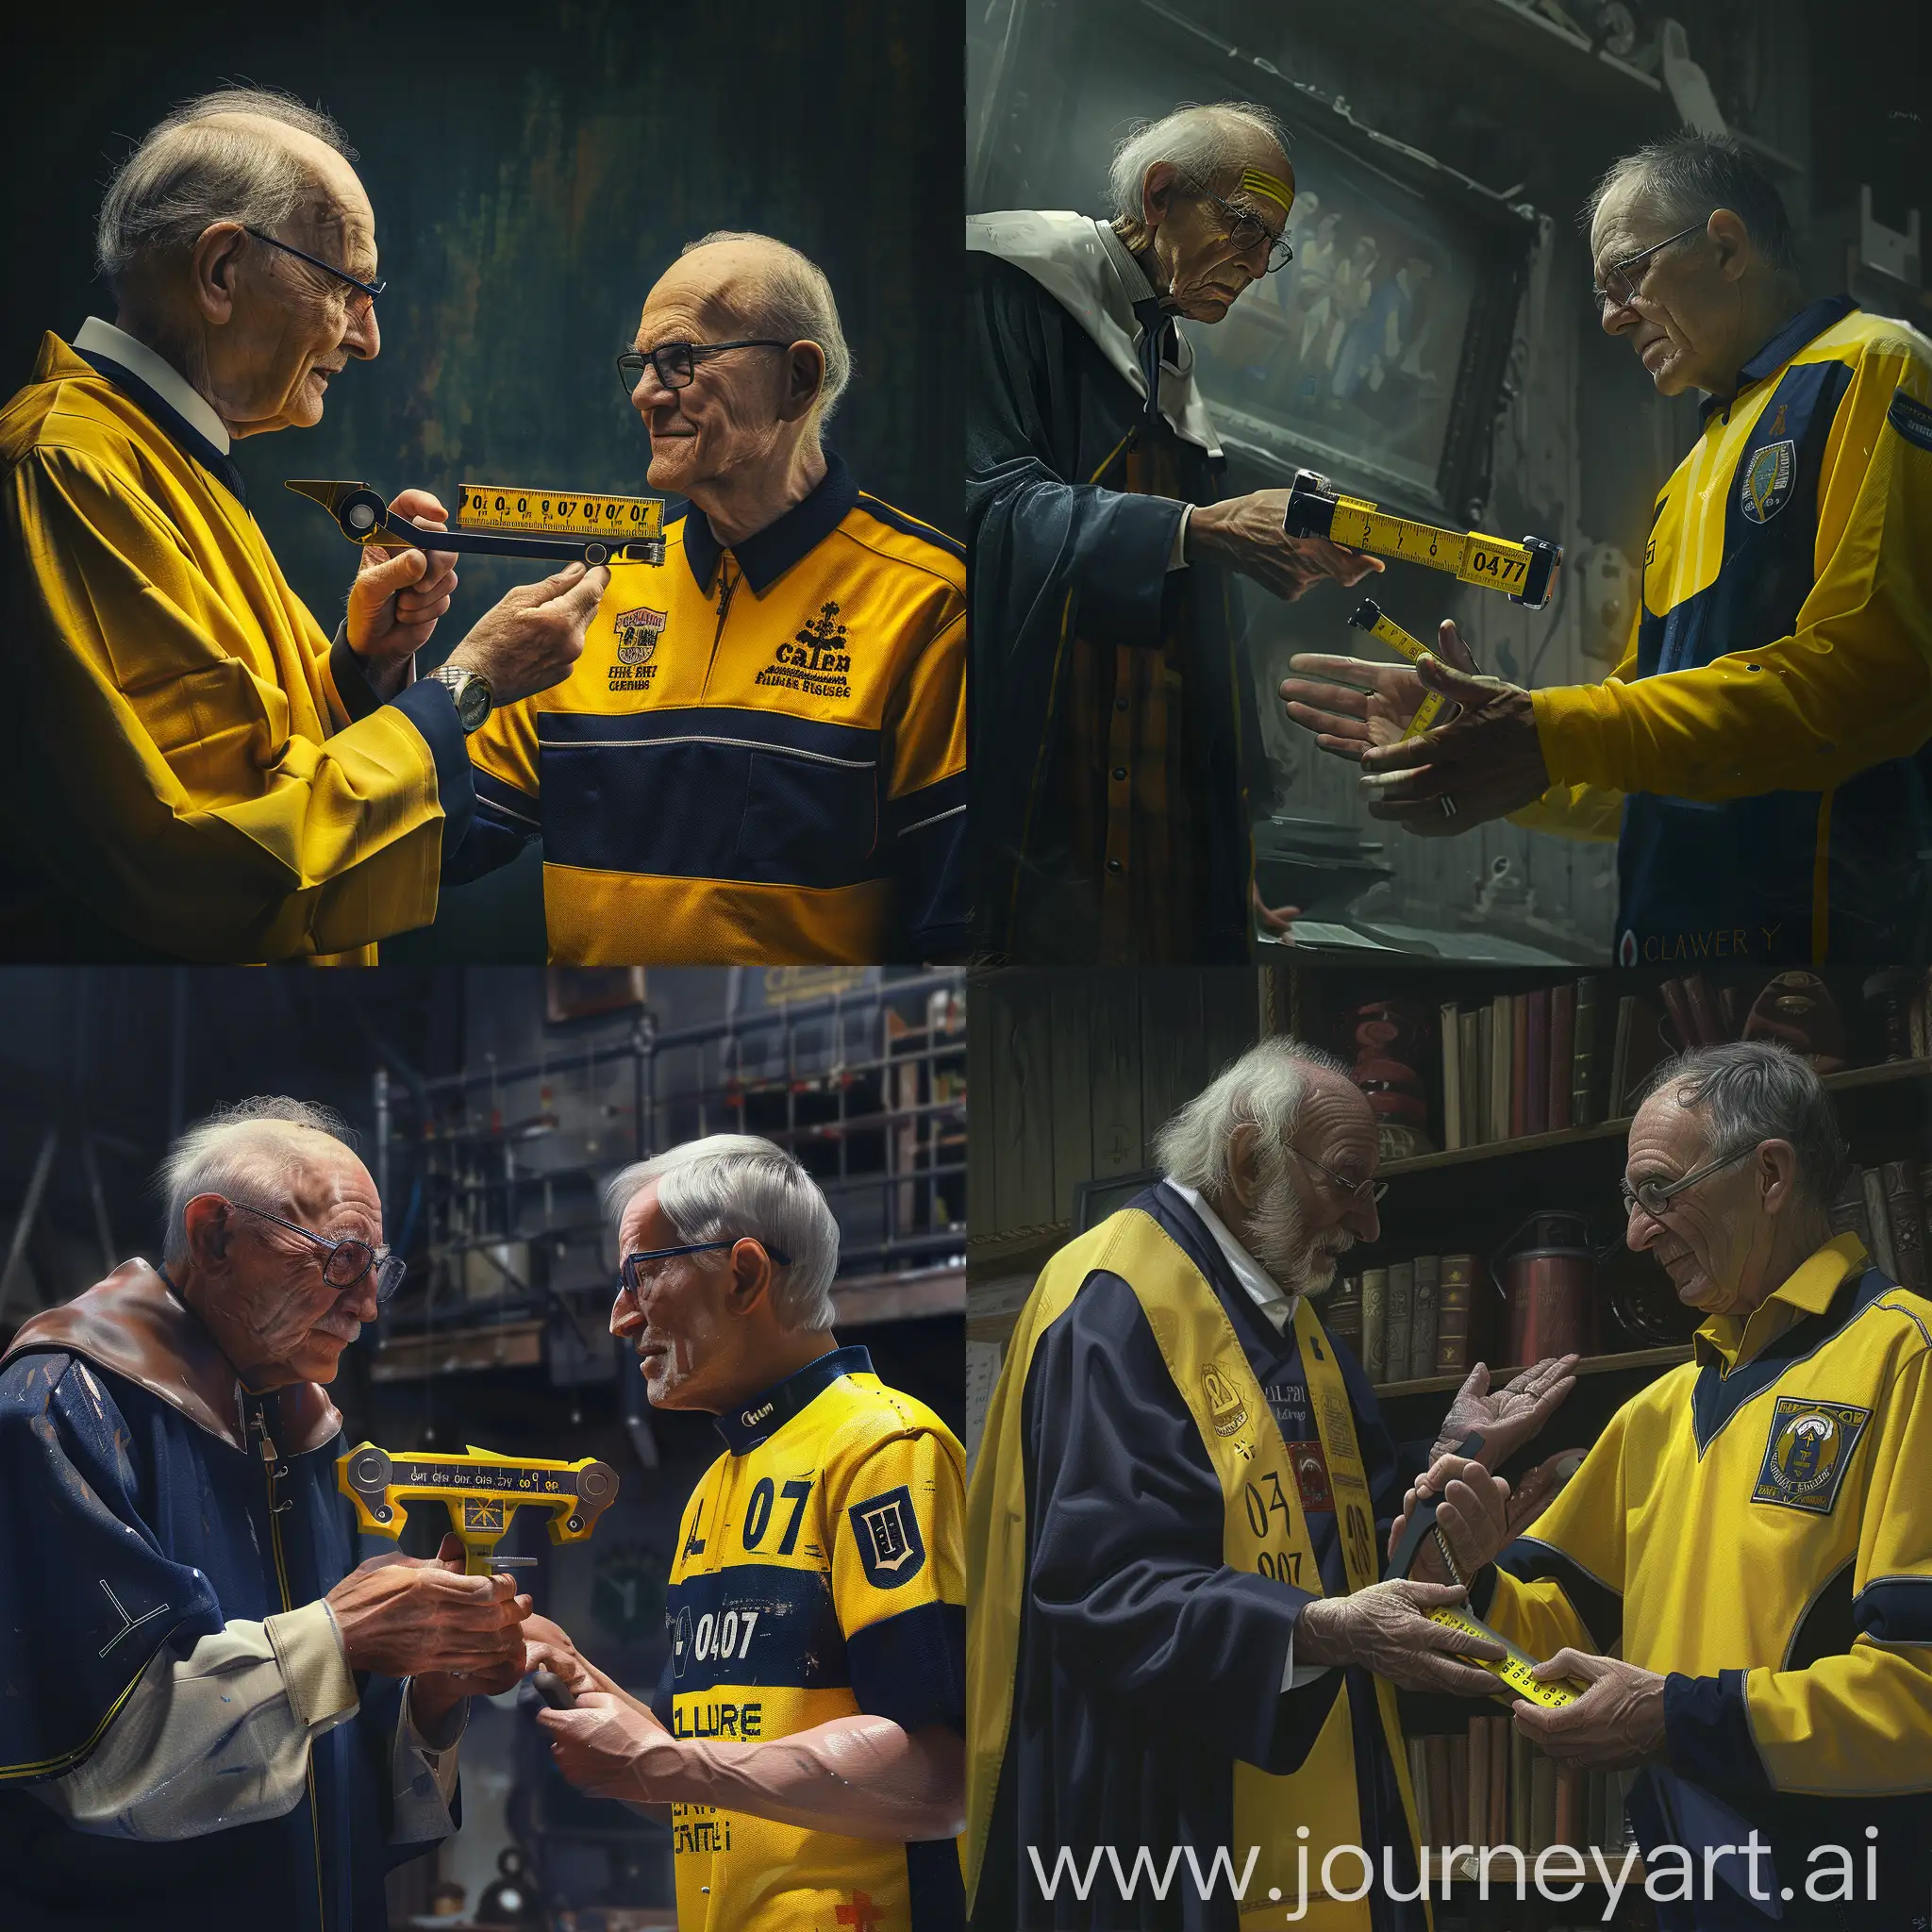 A ''Caliper'' with 03.07 written on it, in yellow and dark blue colors. An old clergyman gives the yellow and dark blue caliper in his hand to a man in a Yellow and Navy jersey. A man gives a caliper, 03.07 caliper.